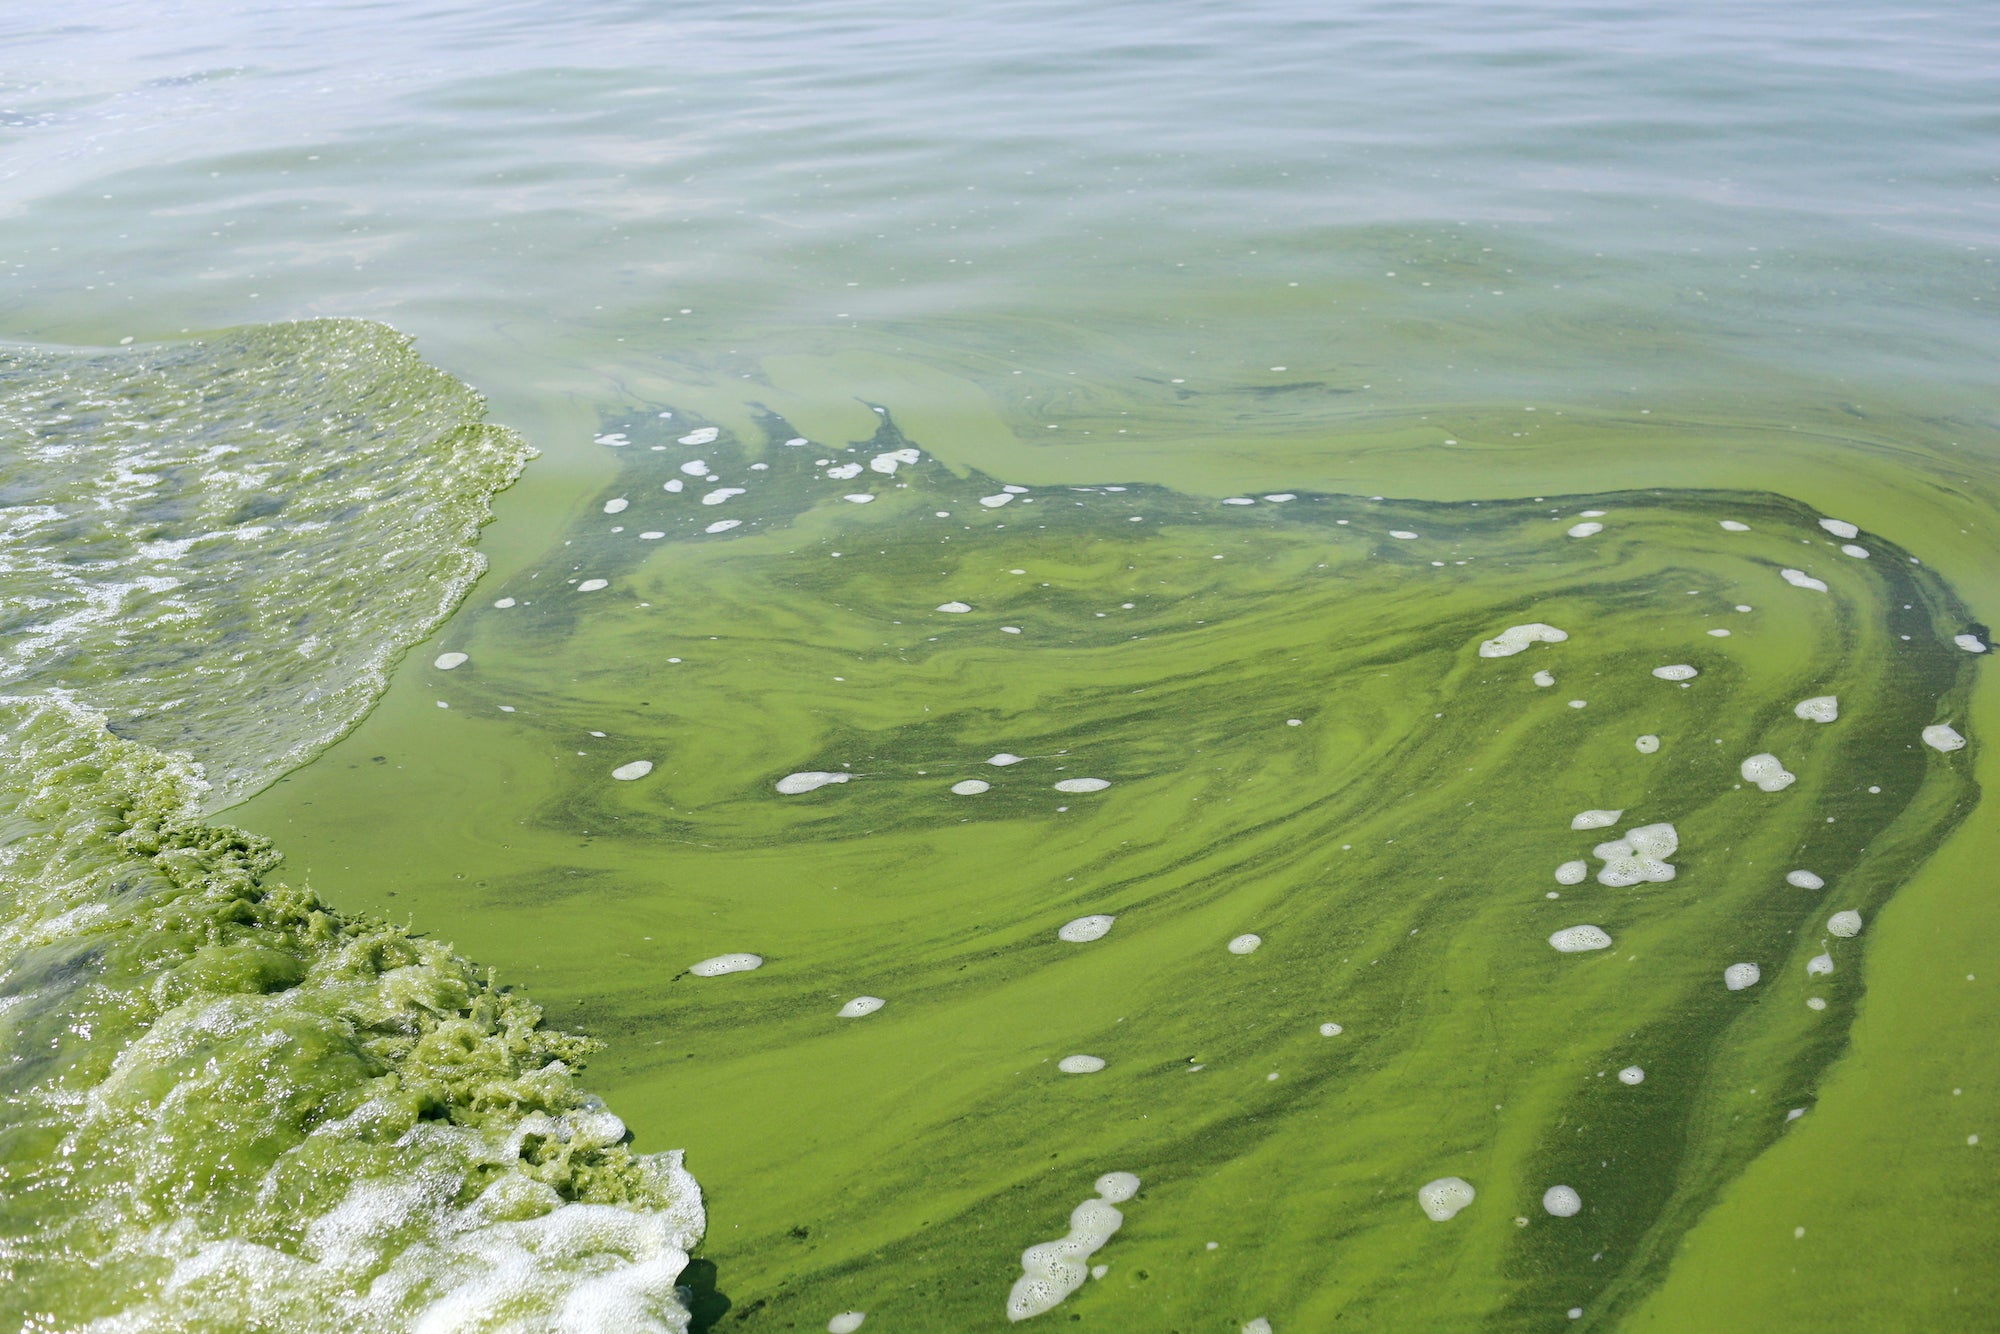 Blue-green algae: toxic levels found in South Jersey pond - WHYY